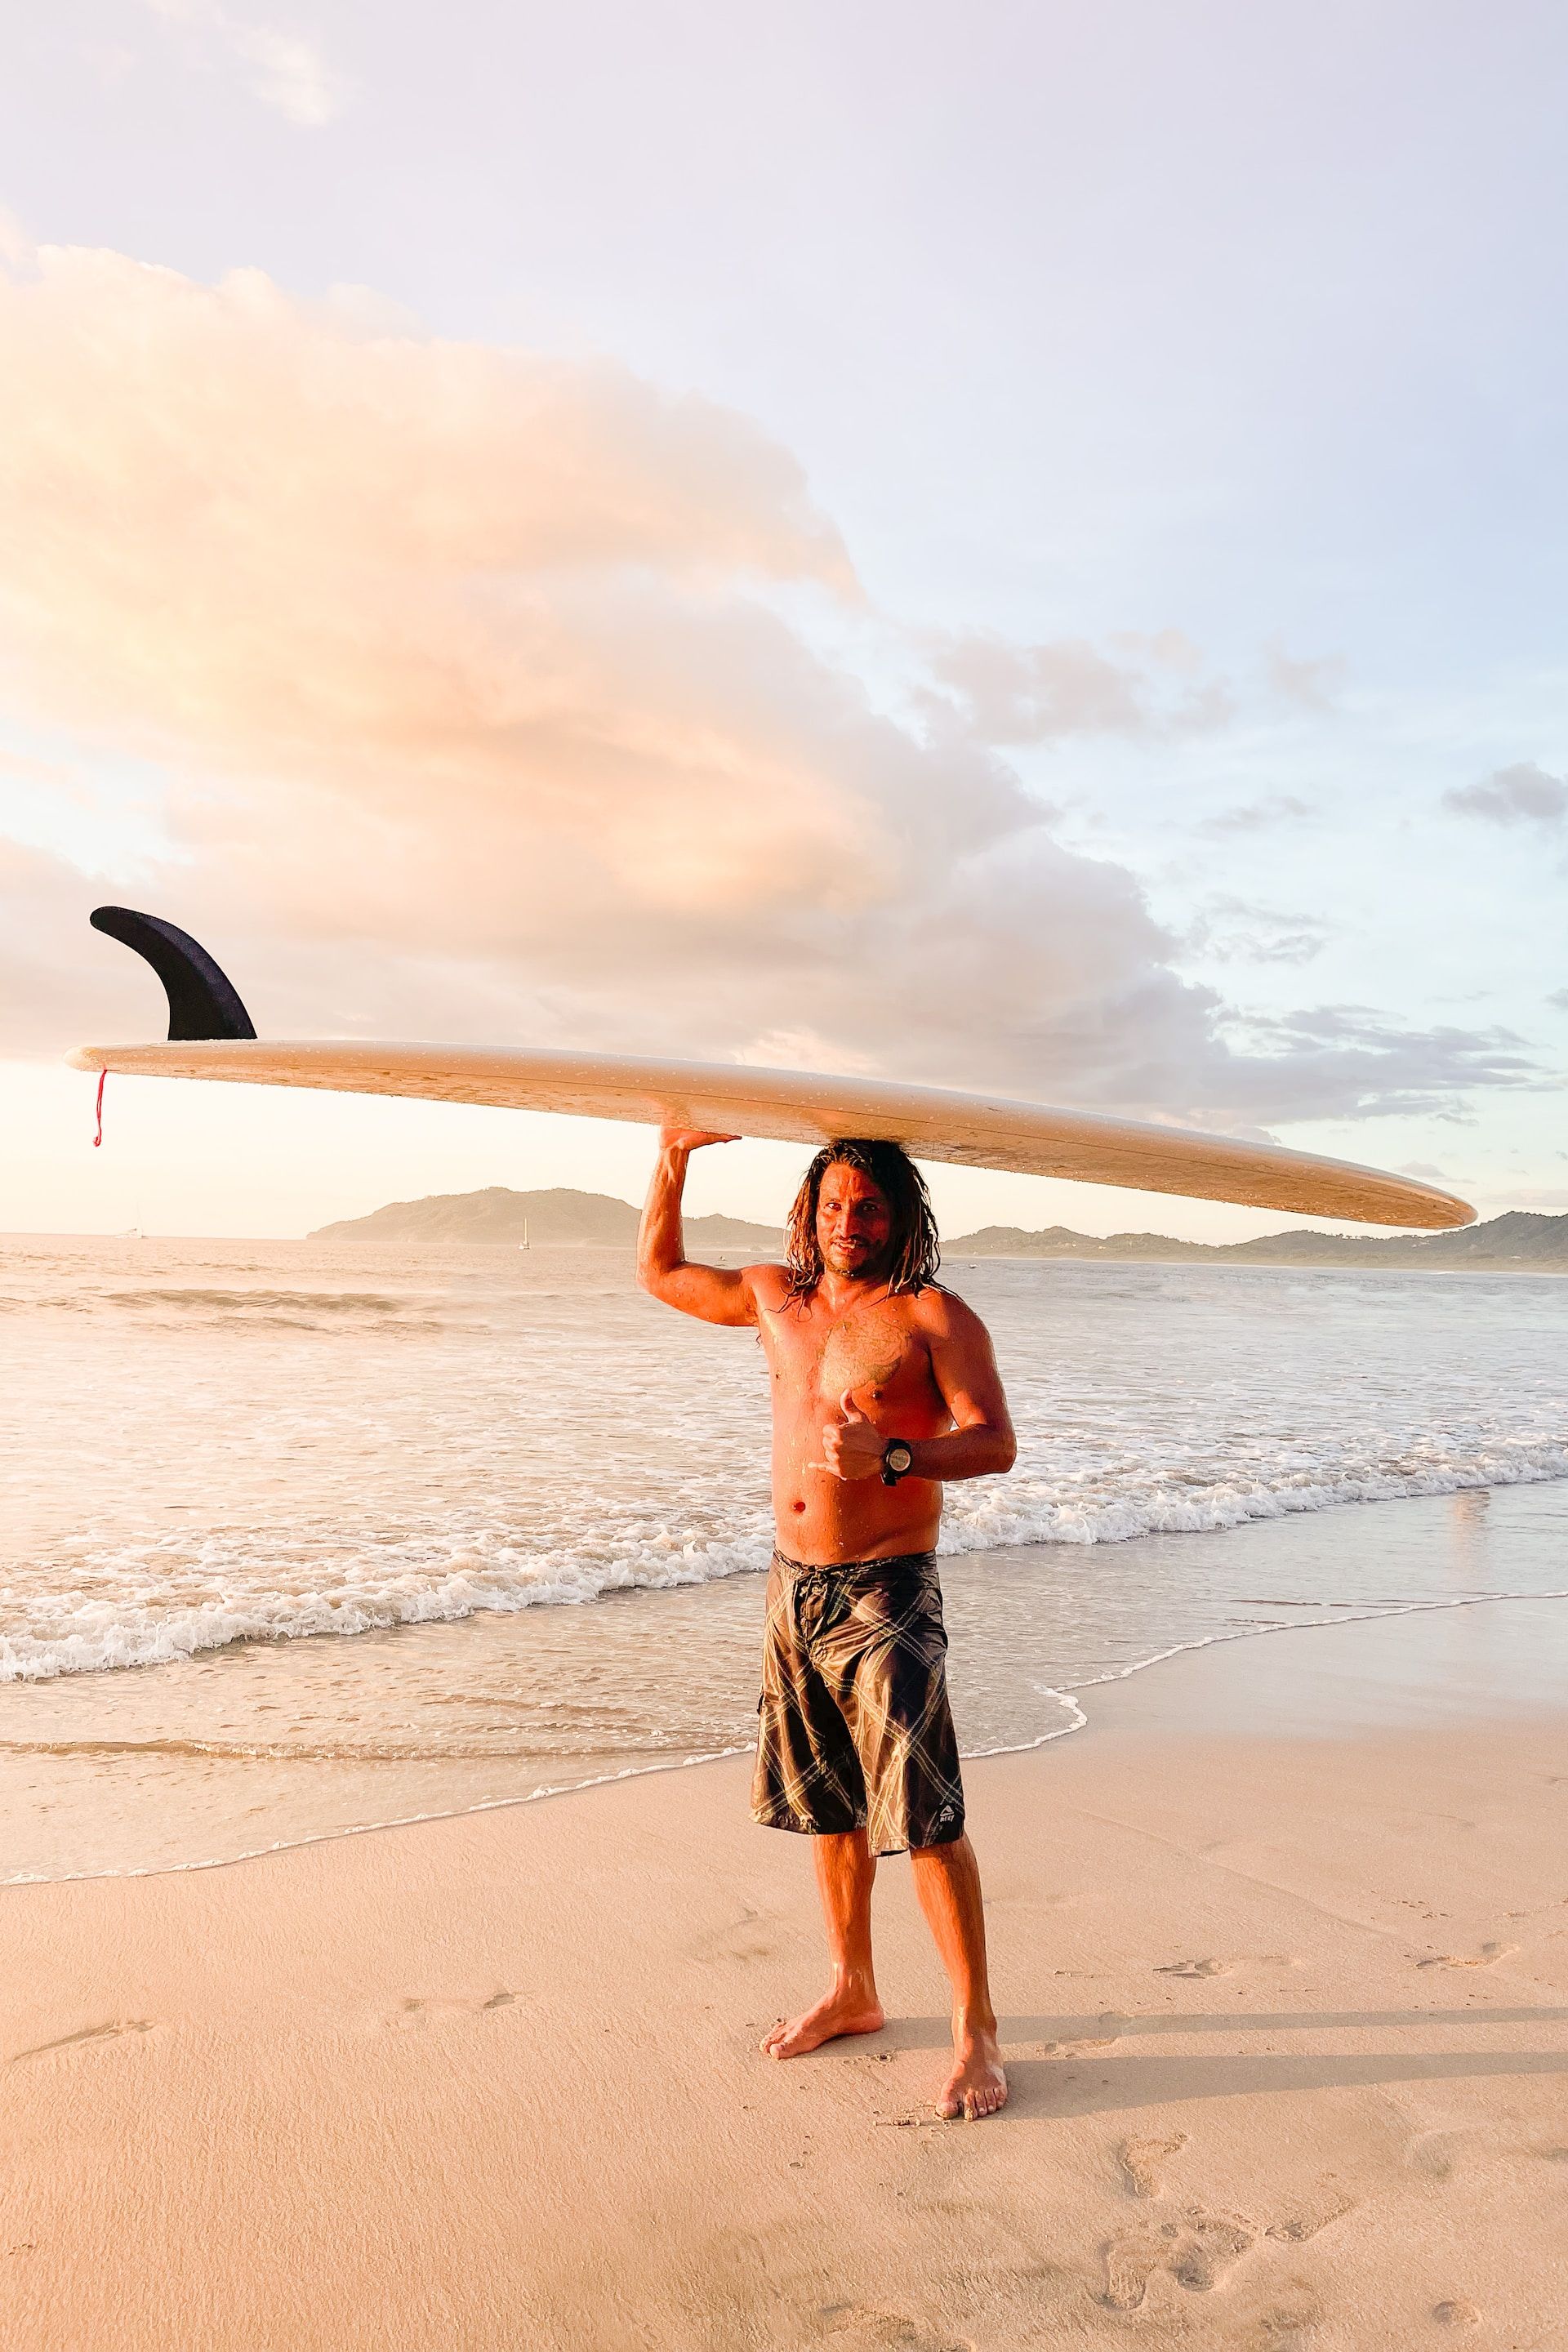 Surfer standing on the beach in Tamarindo giving a shaka while holding a longboard